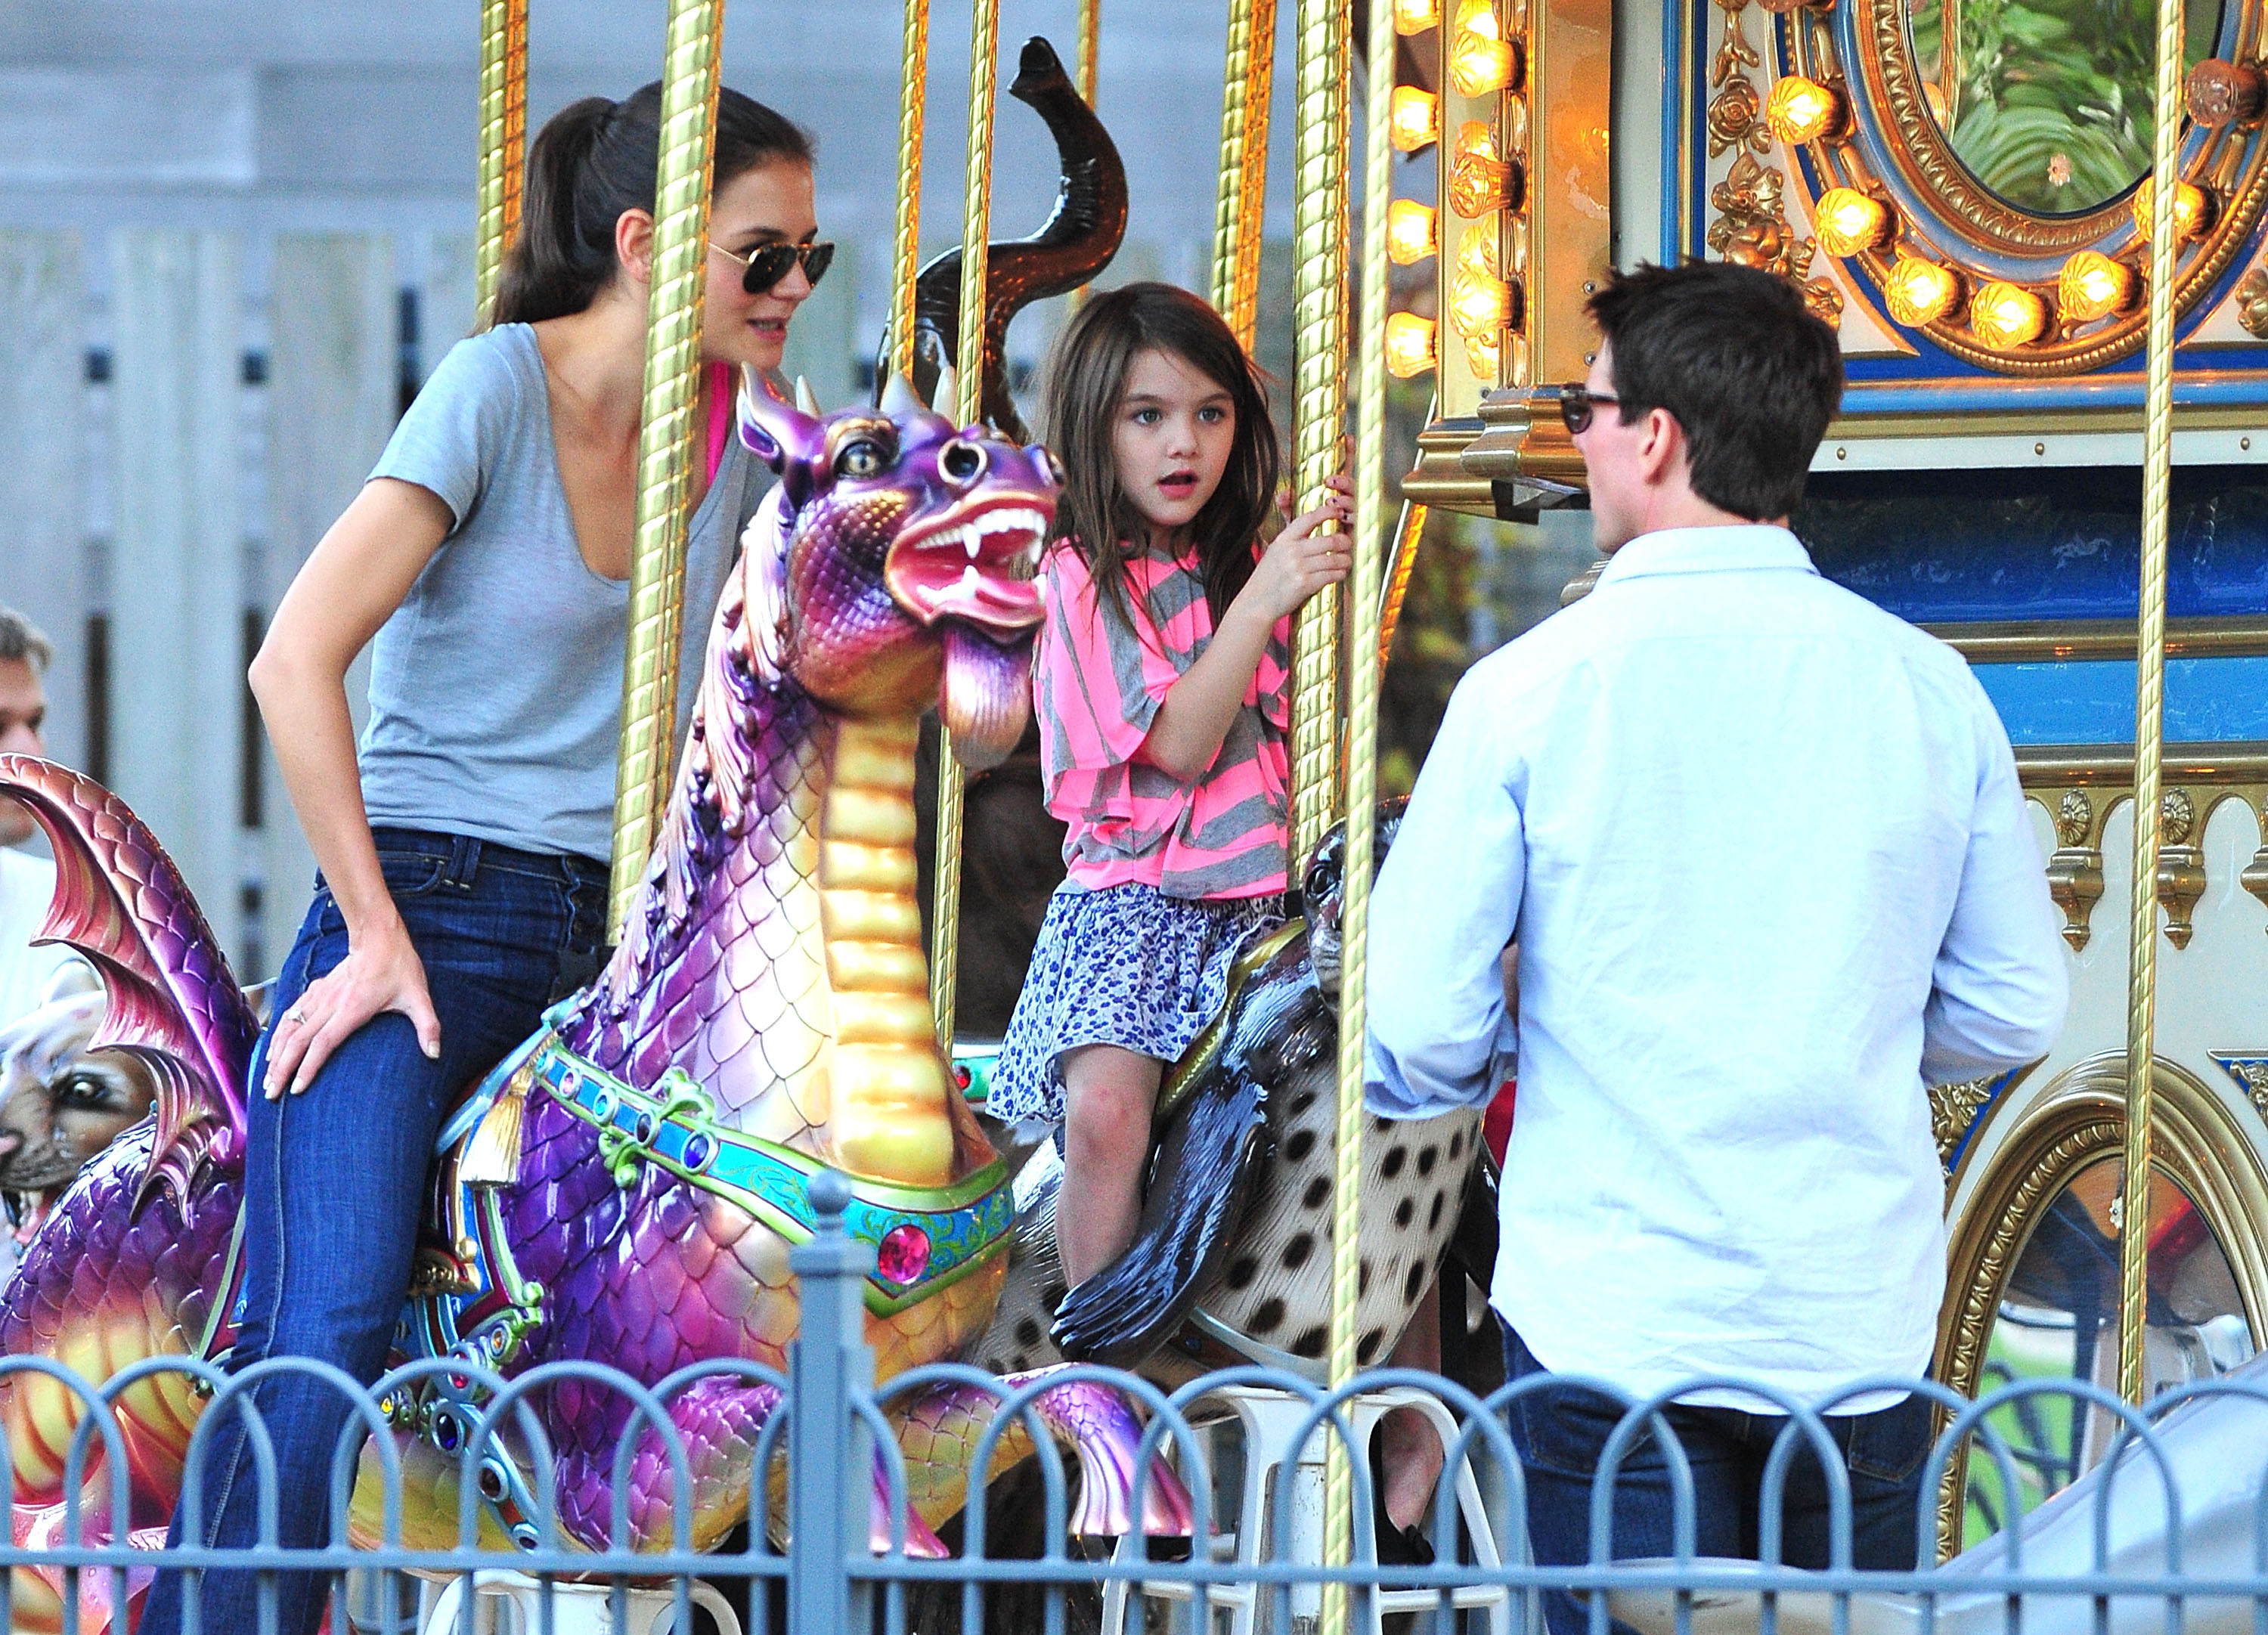 Katie Holmes, Suri Cruise, and Tom Cruise visit Schenley Plaza's carousel in Pittsburgh, Pennsylvania, on October 8, 2011. | Source: Getty Images